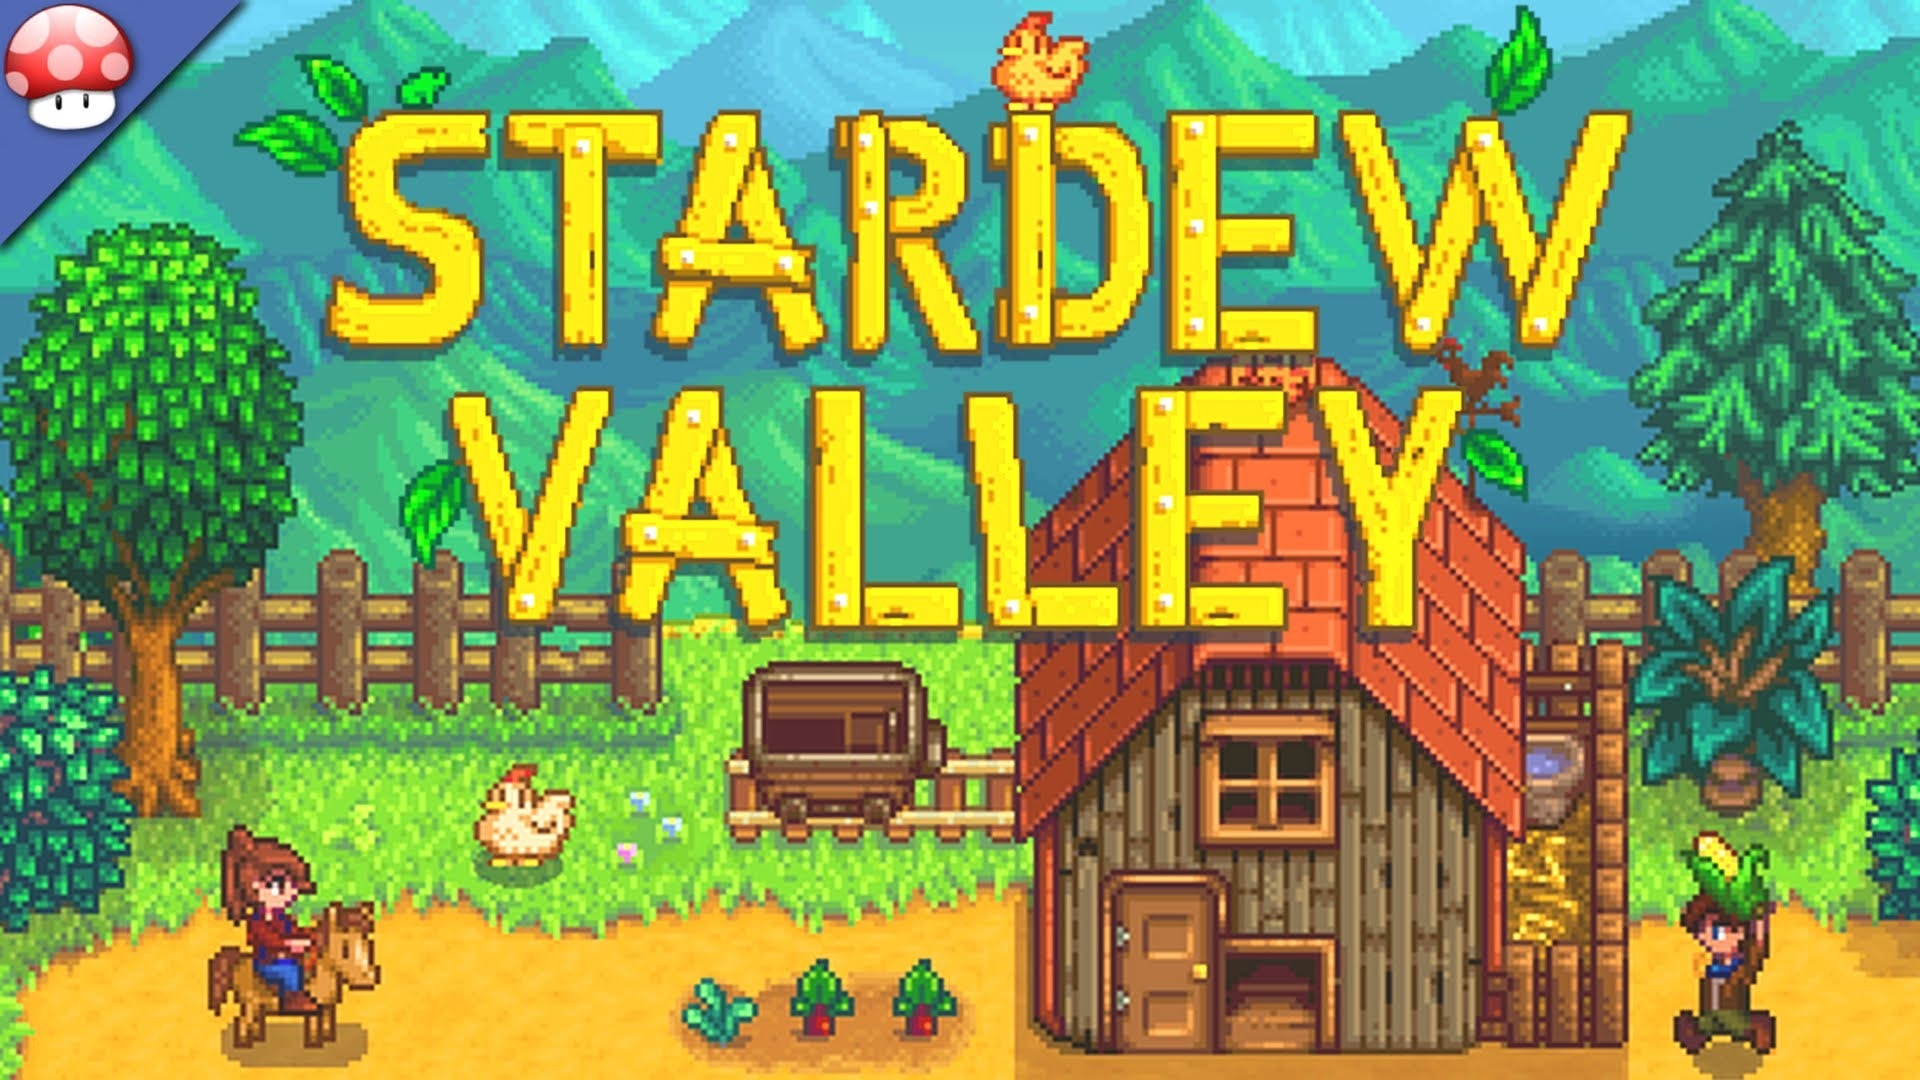 1920x1080 Stardew Valley Switch Wallpapers + Cool Tips! LovelyTab